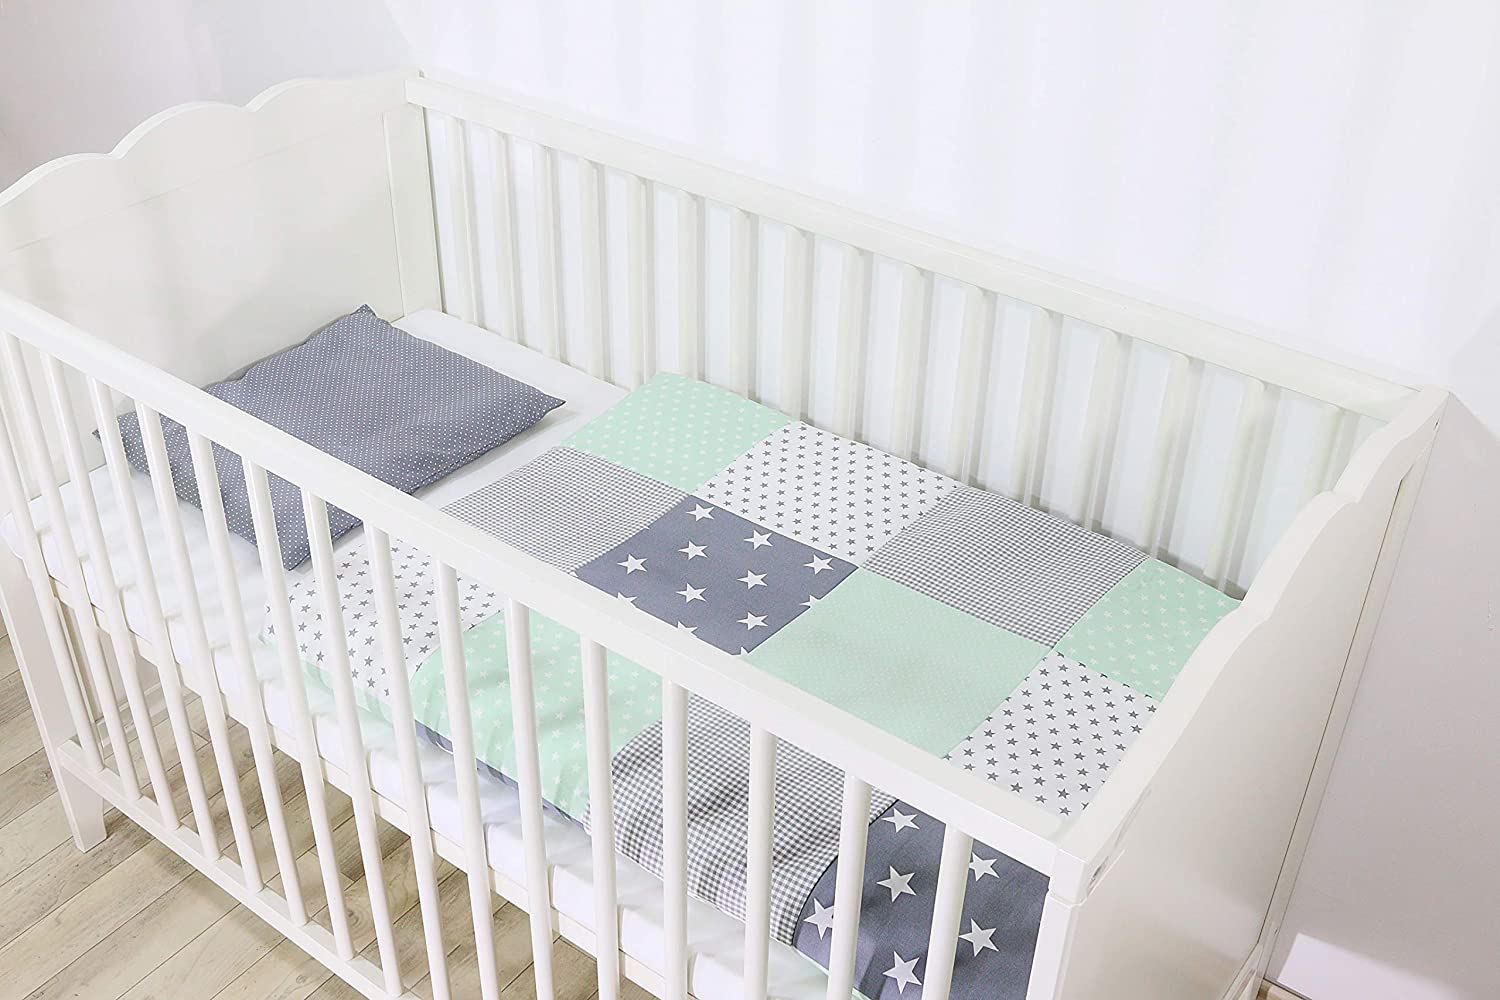 Ullenboom ® Baby Bedding Set - 2 Pieces (Complete): Baby bed linen 80 x 80 cm and pillowcase 35 x 40 cm, baby bed set for the baby bed made from 100% cotton. Mint grey